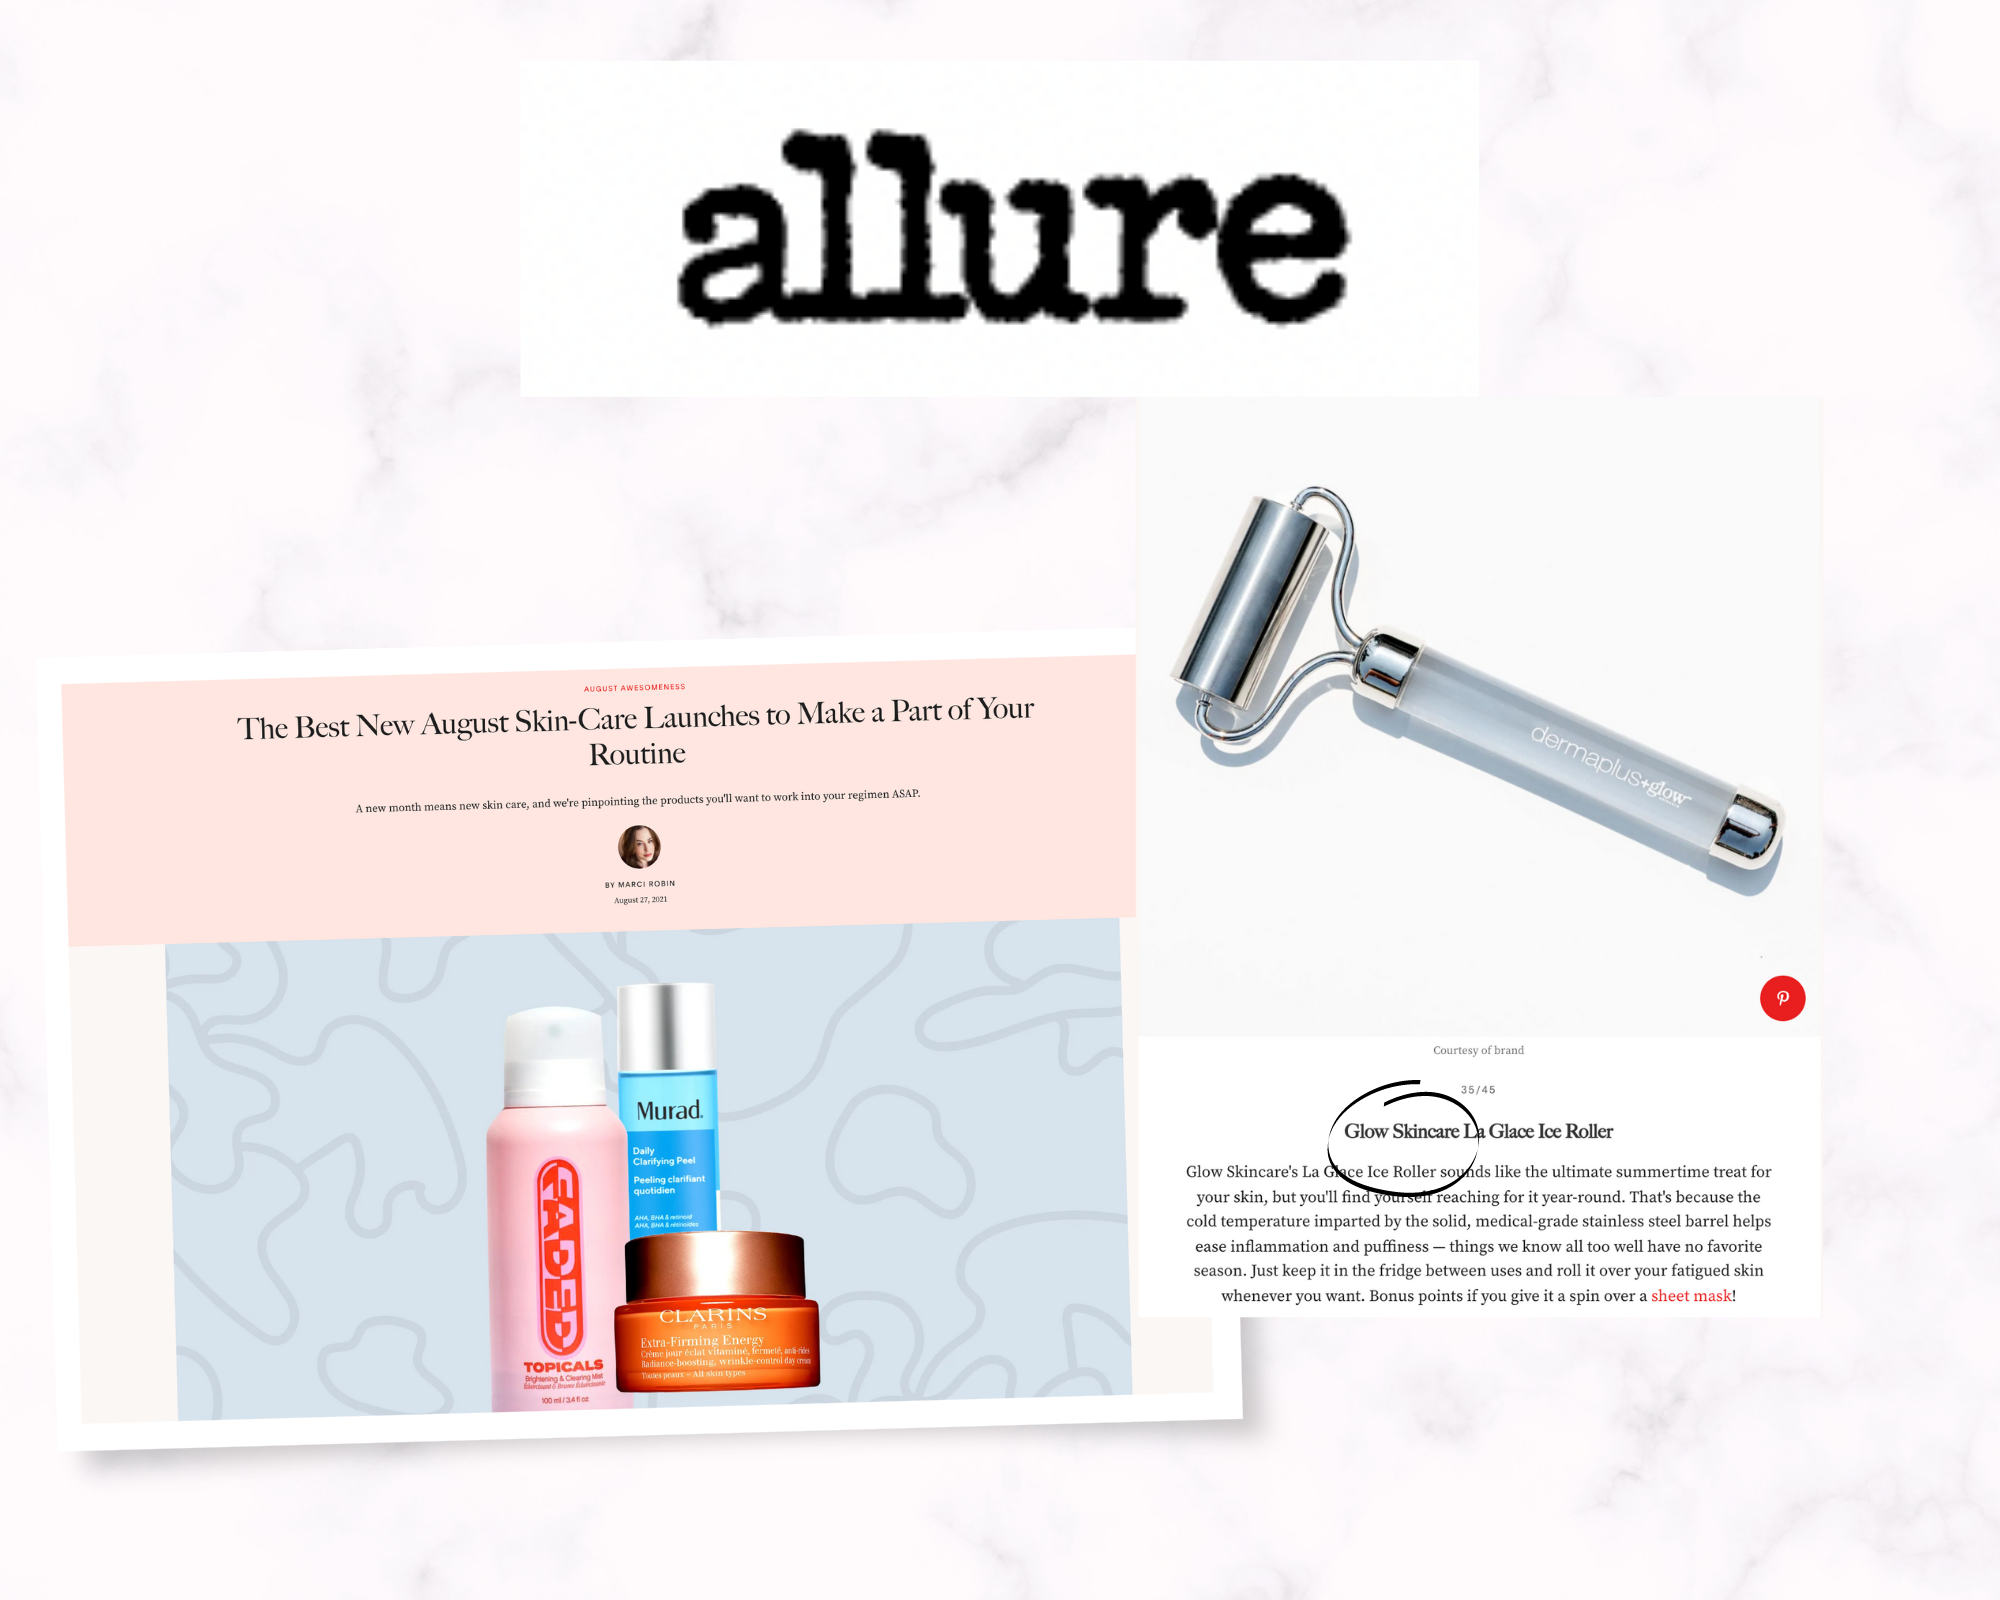 Allure: The Best New August Skin-Care Launches to Make a Part of Your Routine